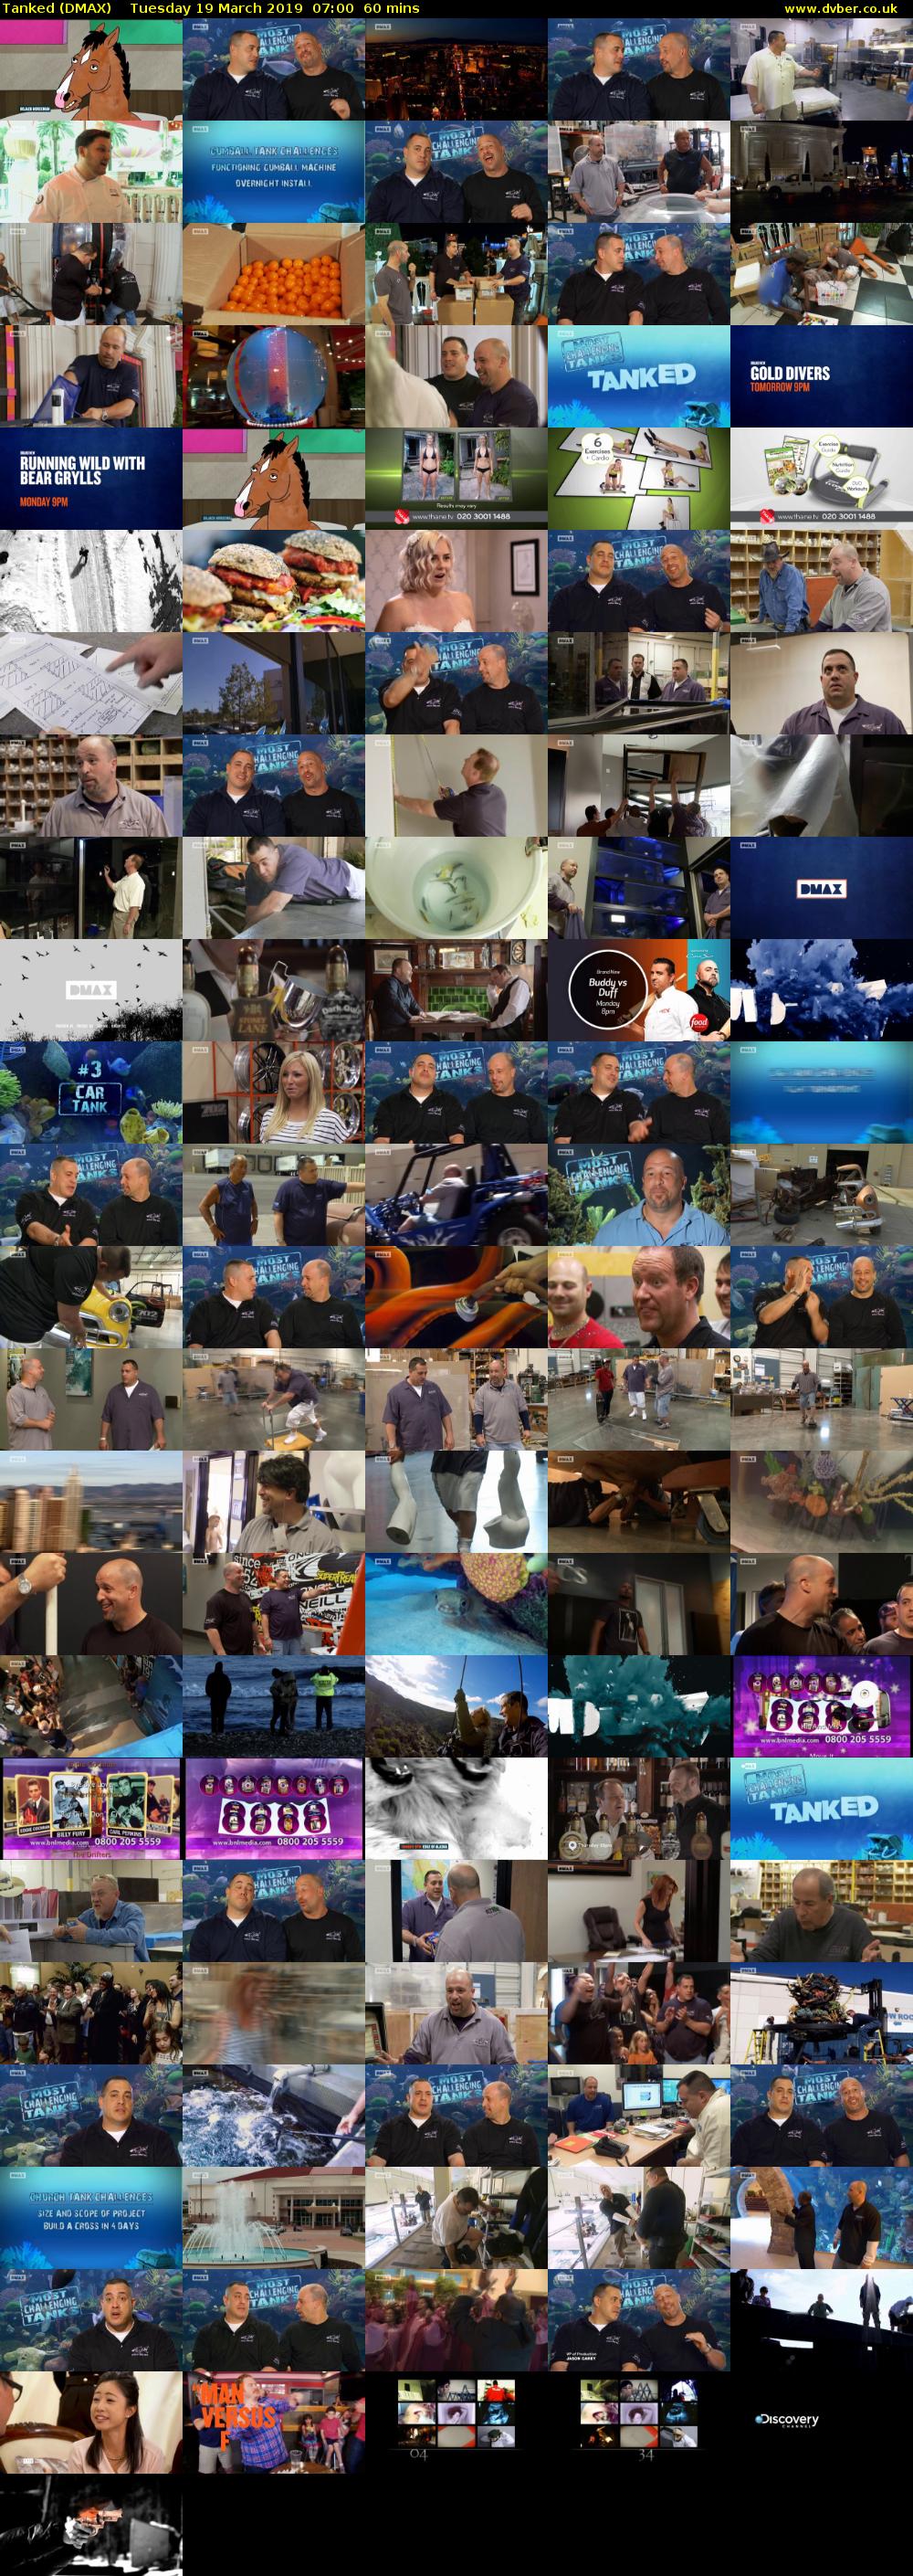 Tanked (DMAX) Tuesday 19 March 2019 07:00 - 08:00